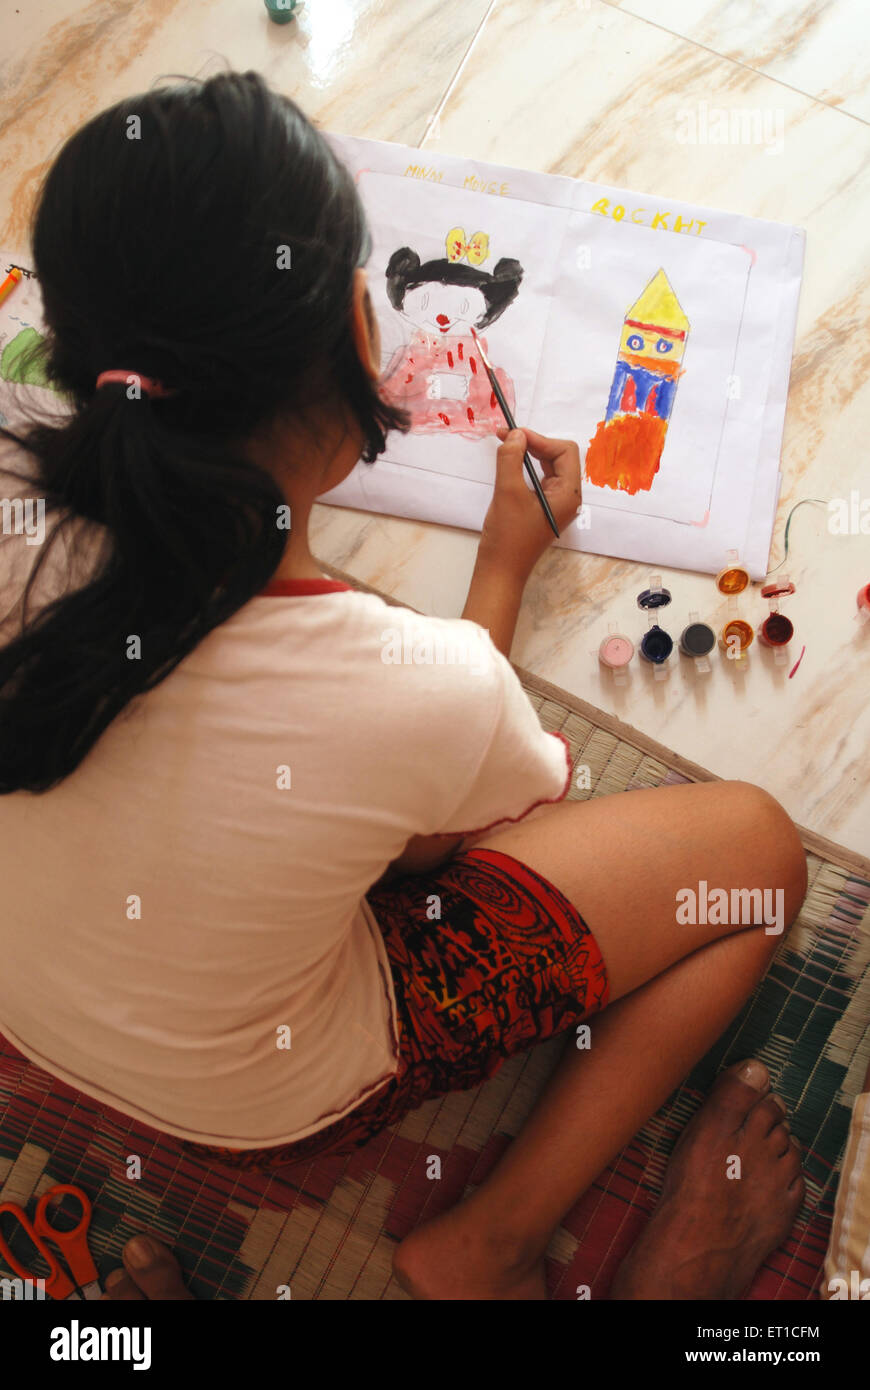 Young girl drawing painting ; MR#704 Stock Photo